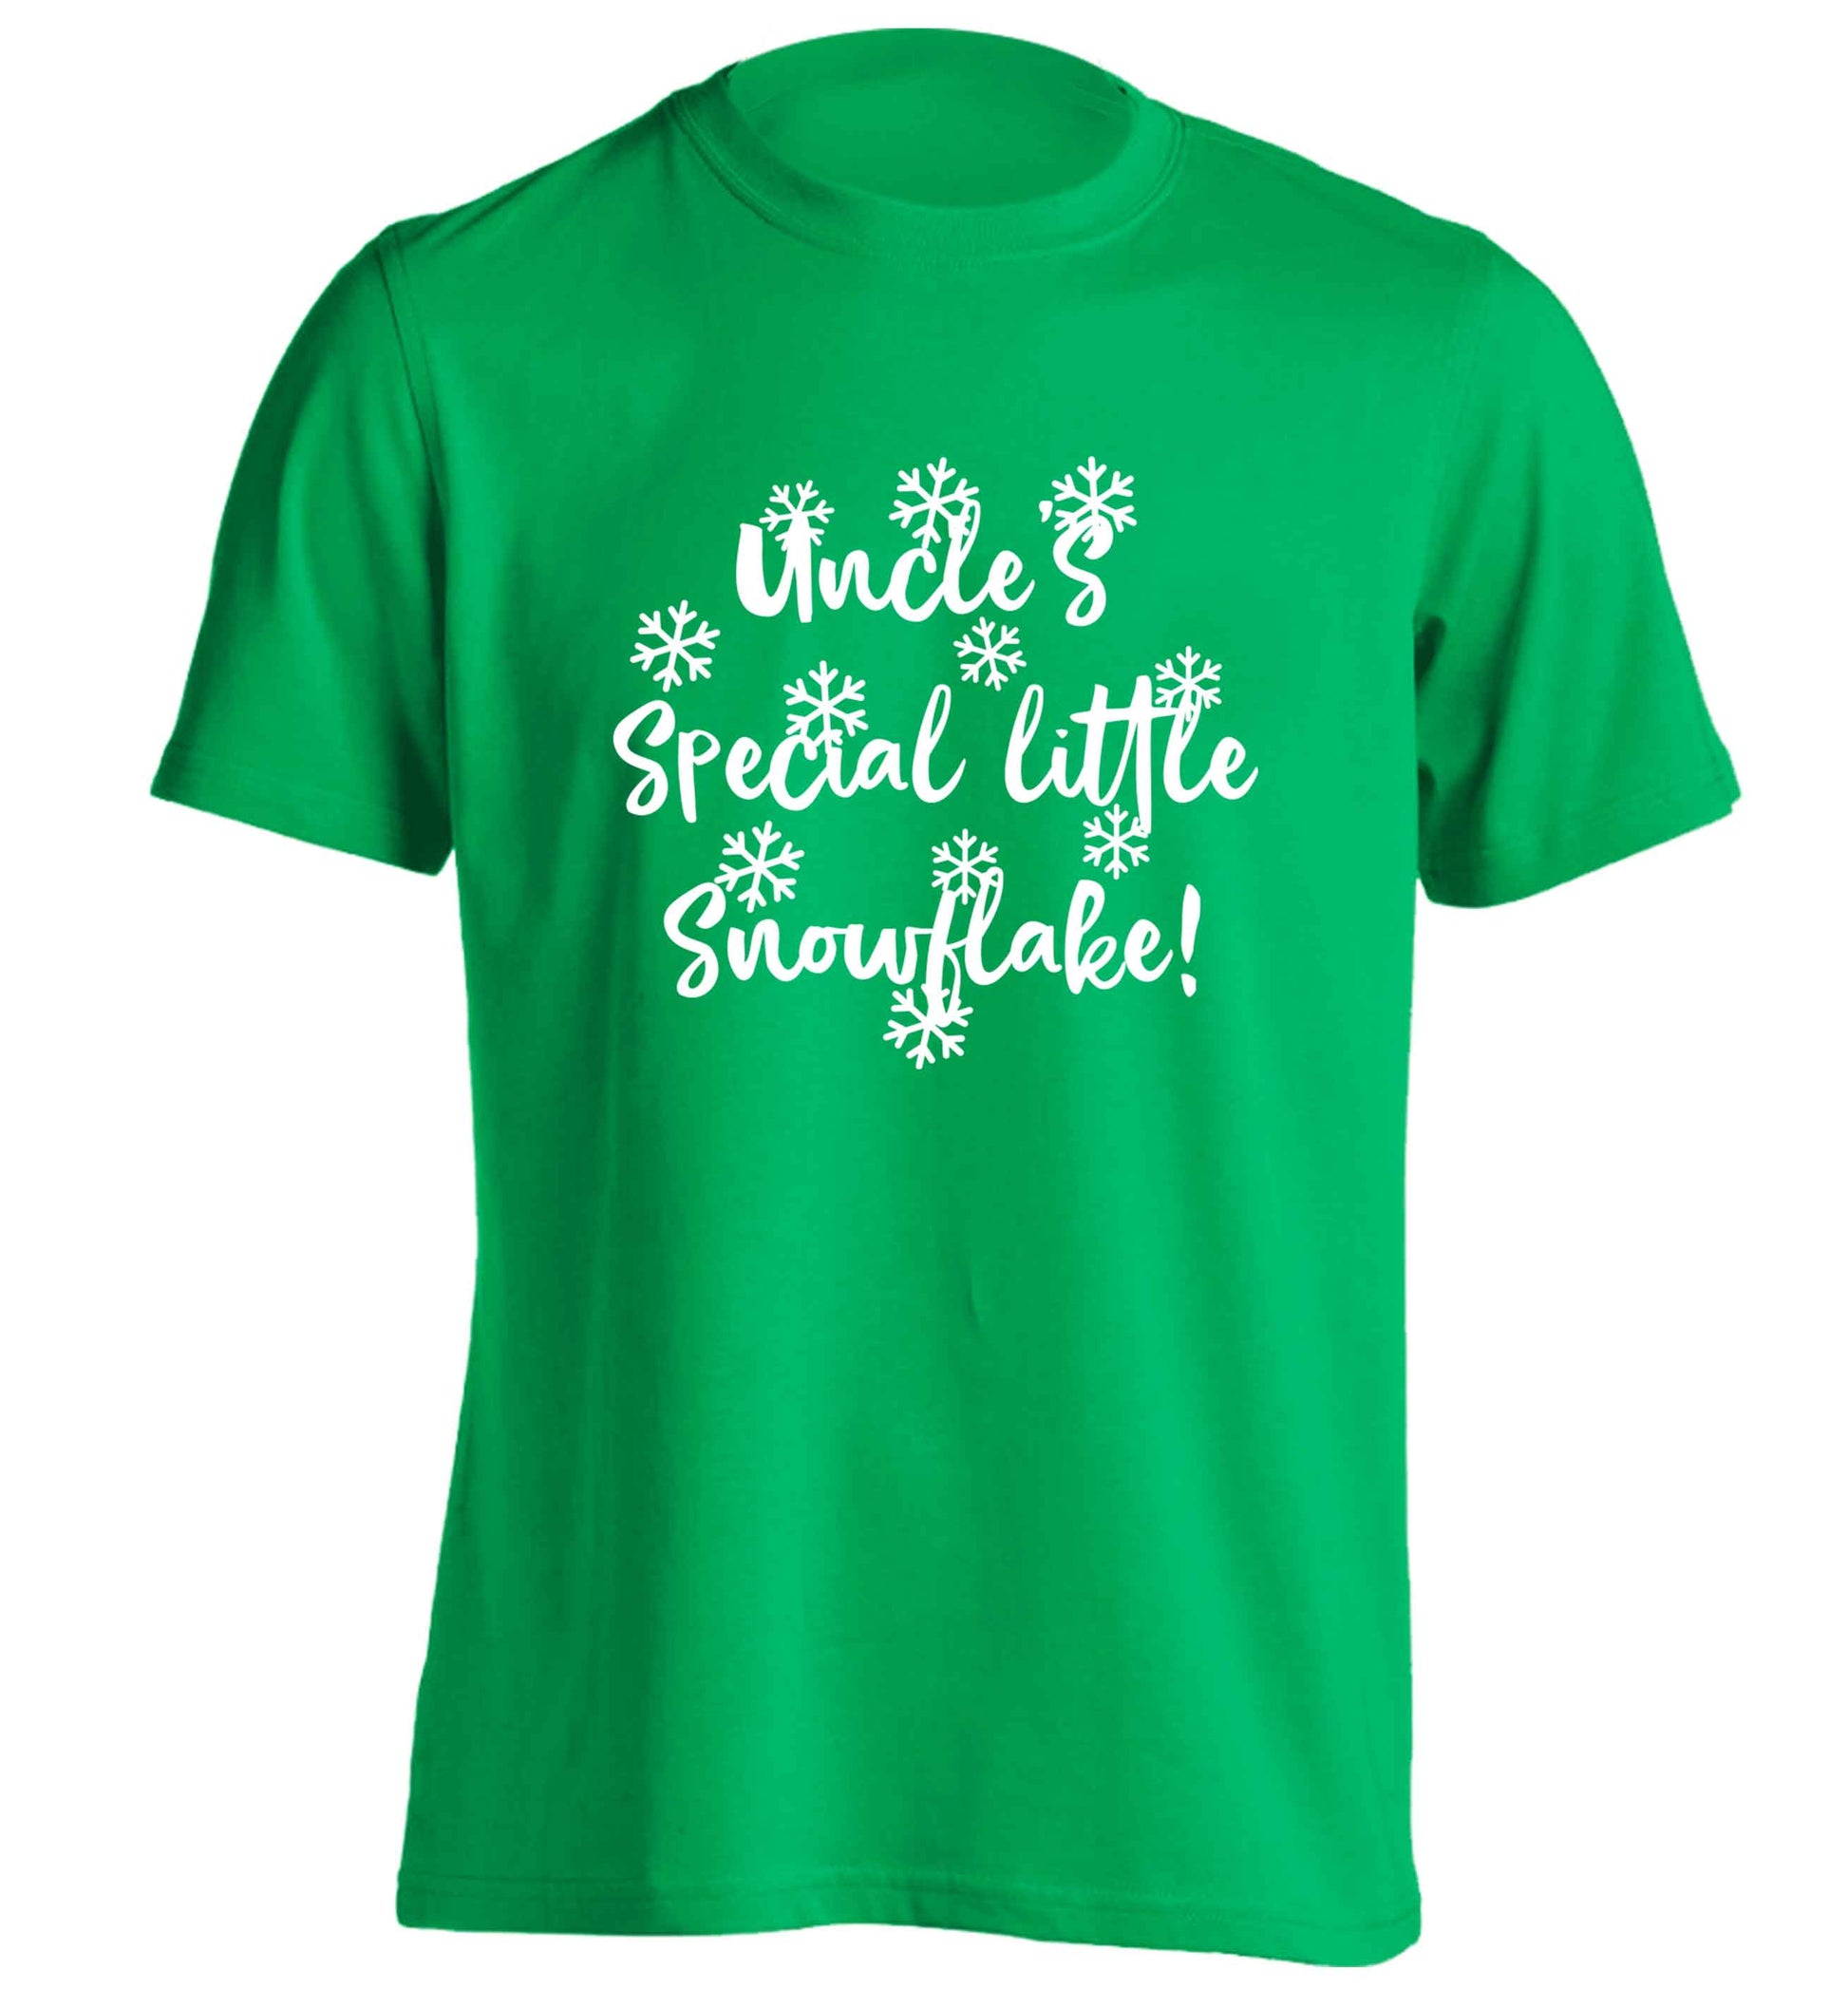 Uncle's special little snowflake adults unisex green Tshirt 2XL